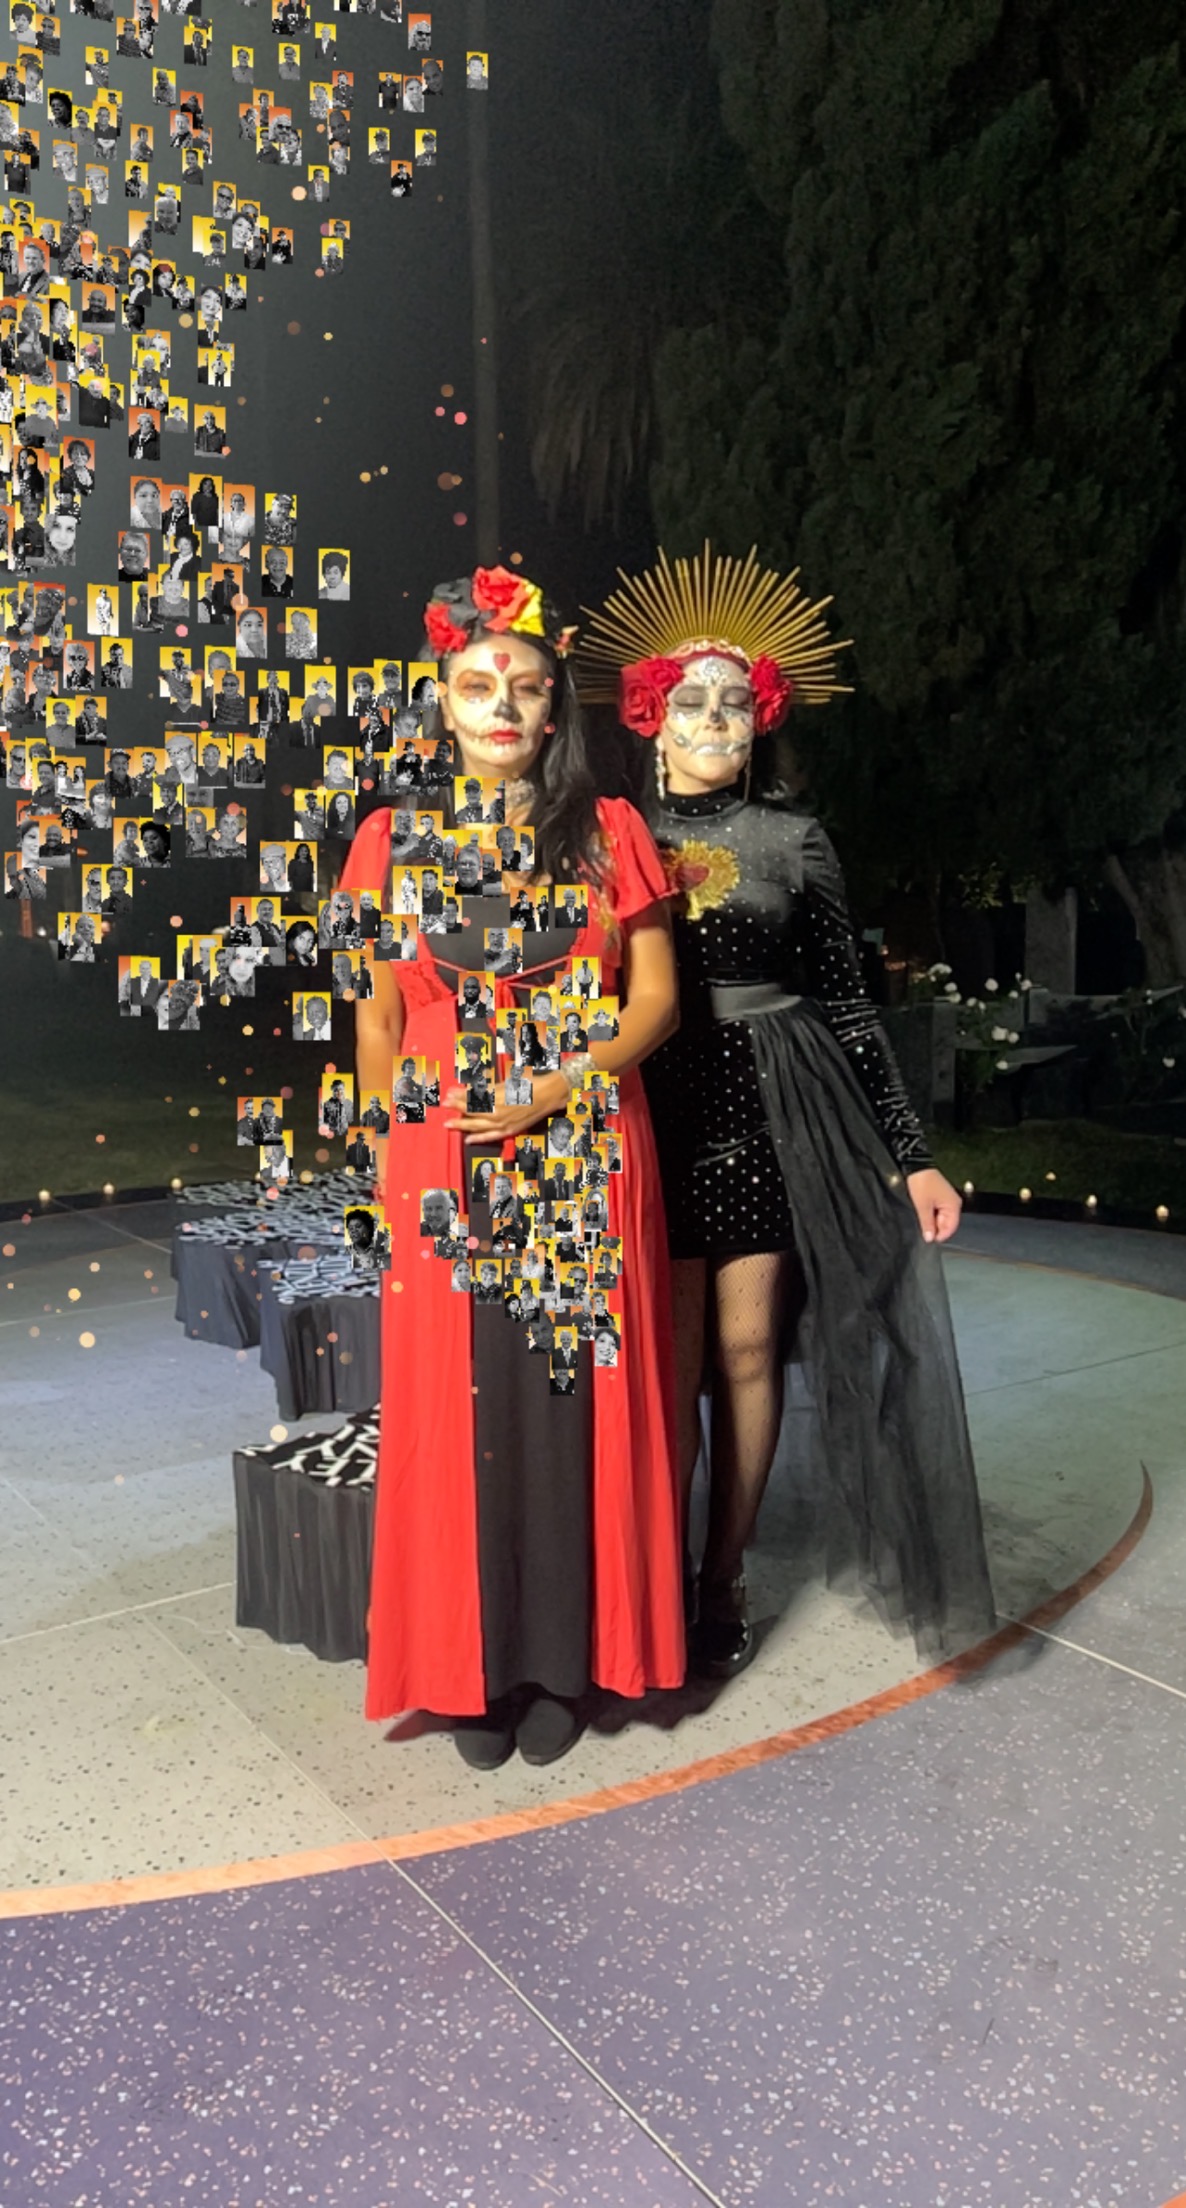 Two women wearing traditional costumes and makeup to celebrate the Day of the Dead stand amid a stream of small portraits in an augmented reality memorial